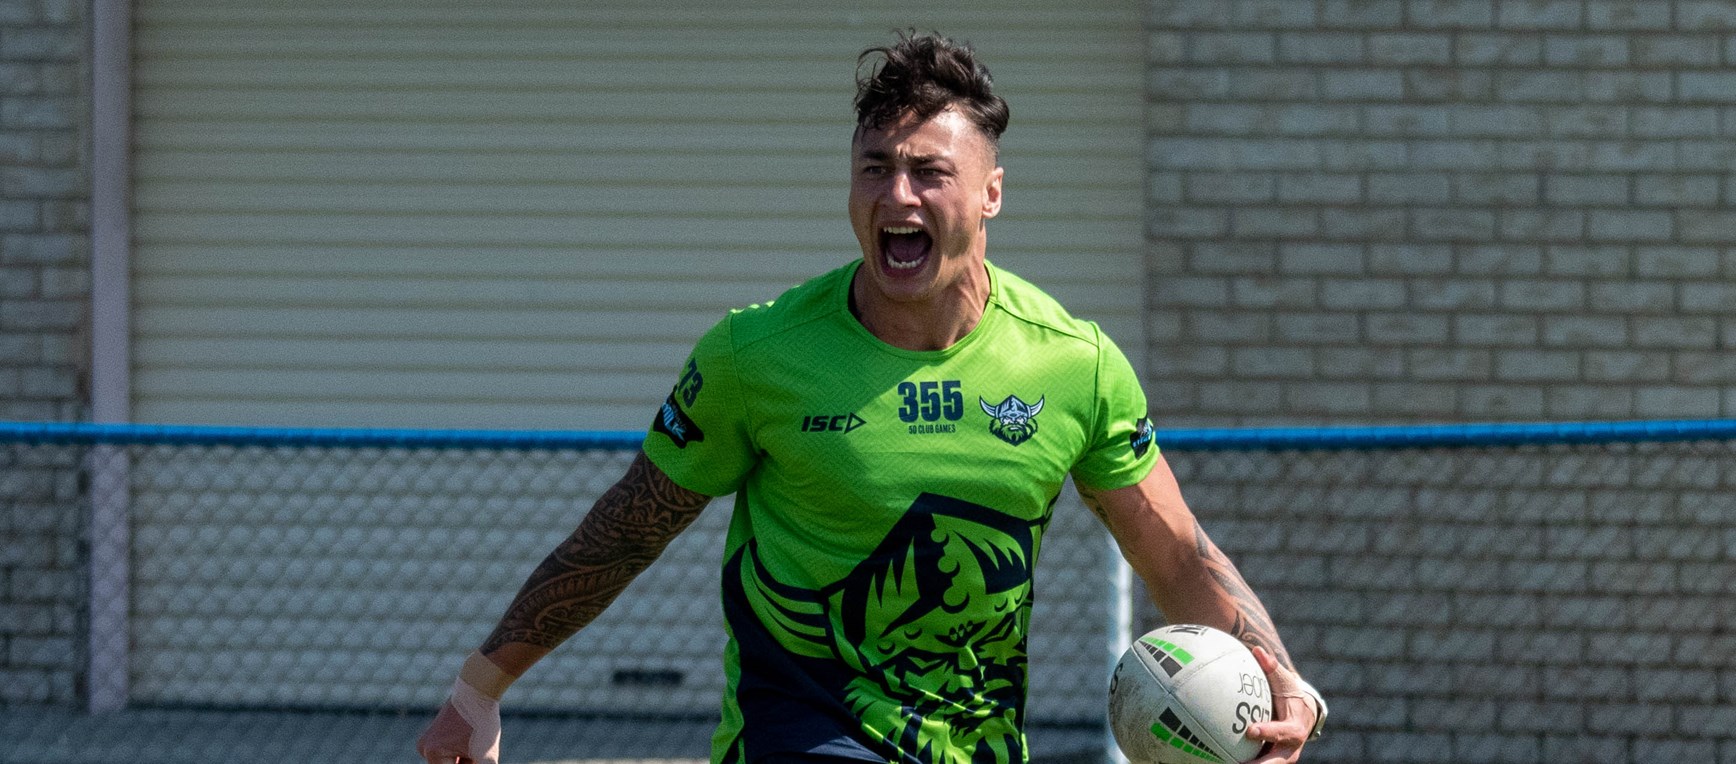 Gallery: Raiders final training run before Roosters match